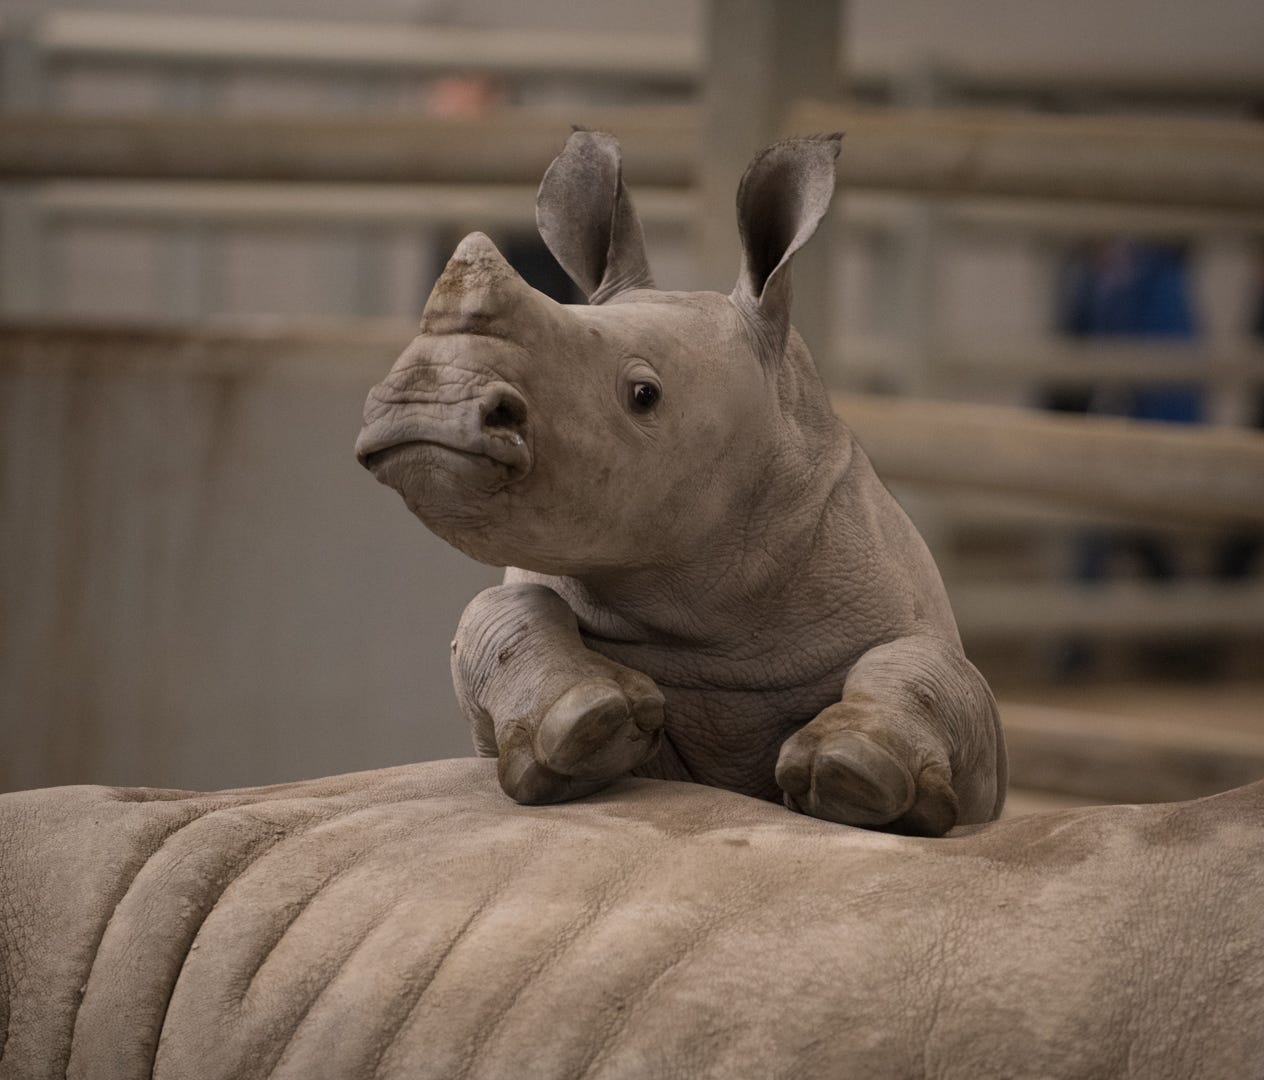 Gilman, a Southern white rhino calf, was born November 16, 2017 at The Wilds in Cumberland, Ohio.